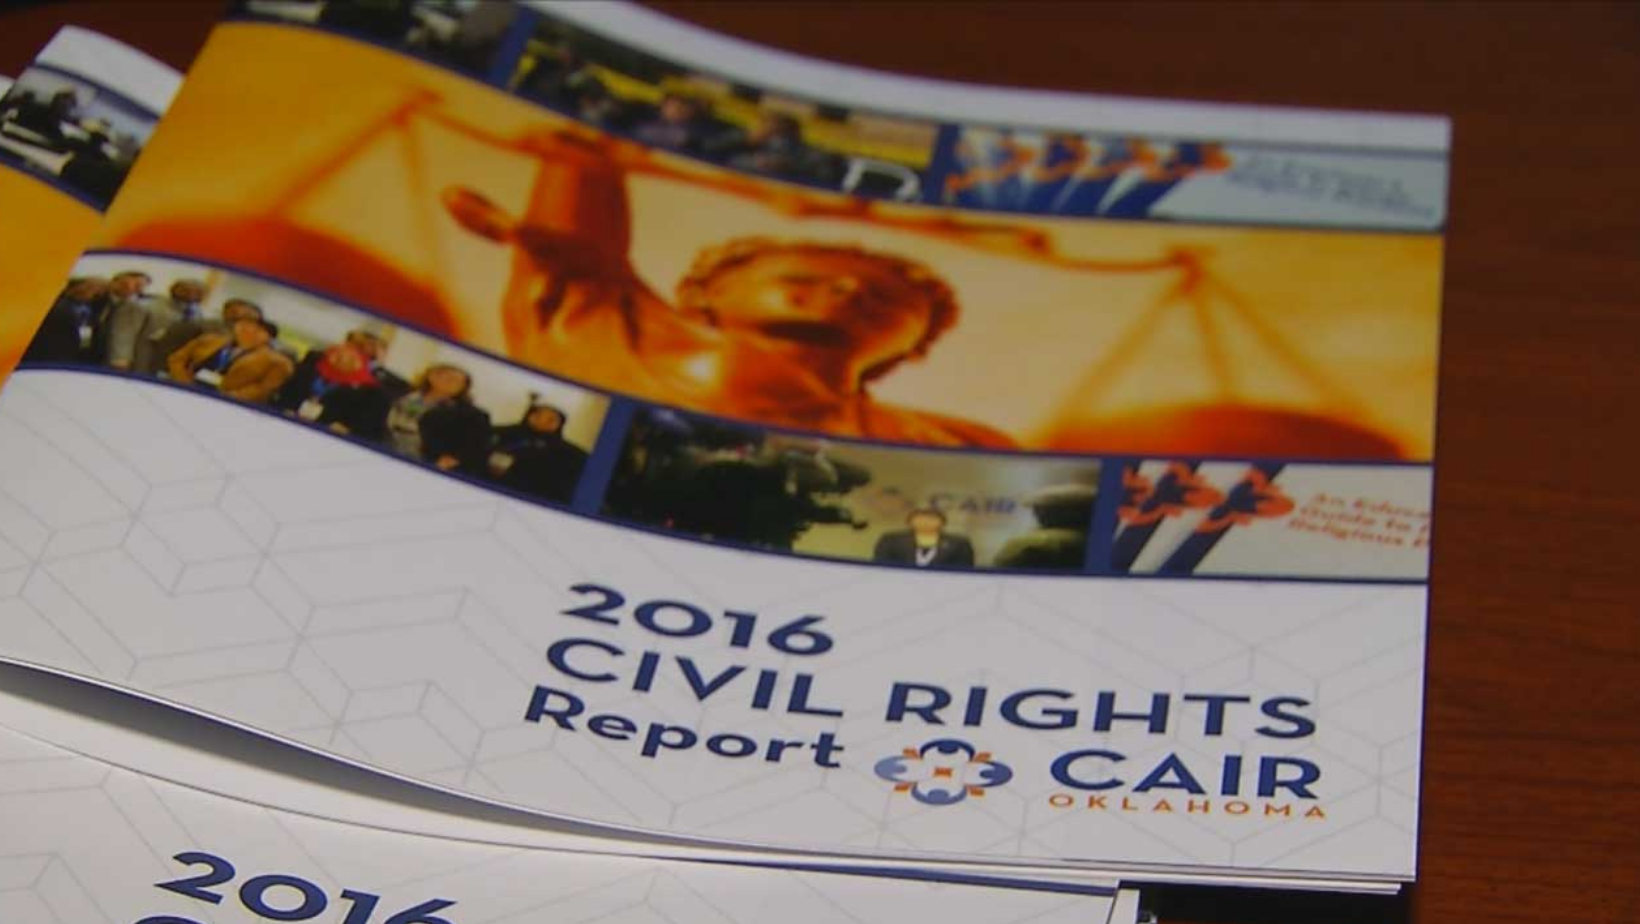 CAIR-OK Releases 2016 Civil Rights Report Documenting Growth in Service to Okie Muslim Community